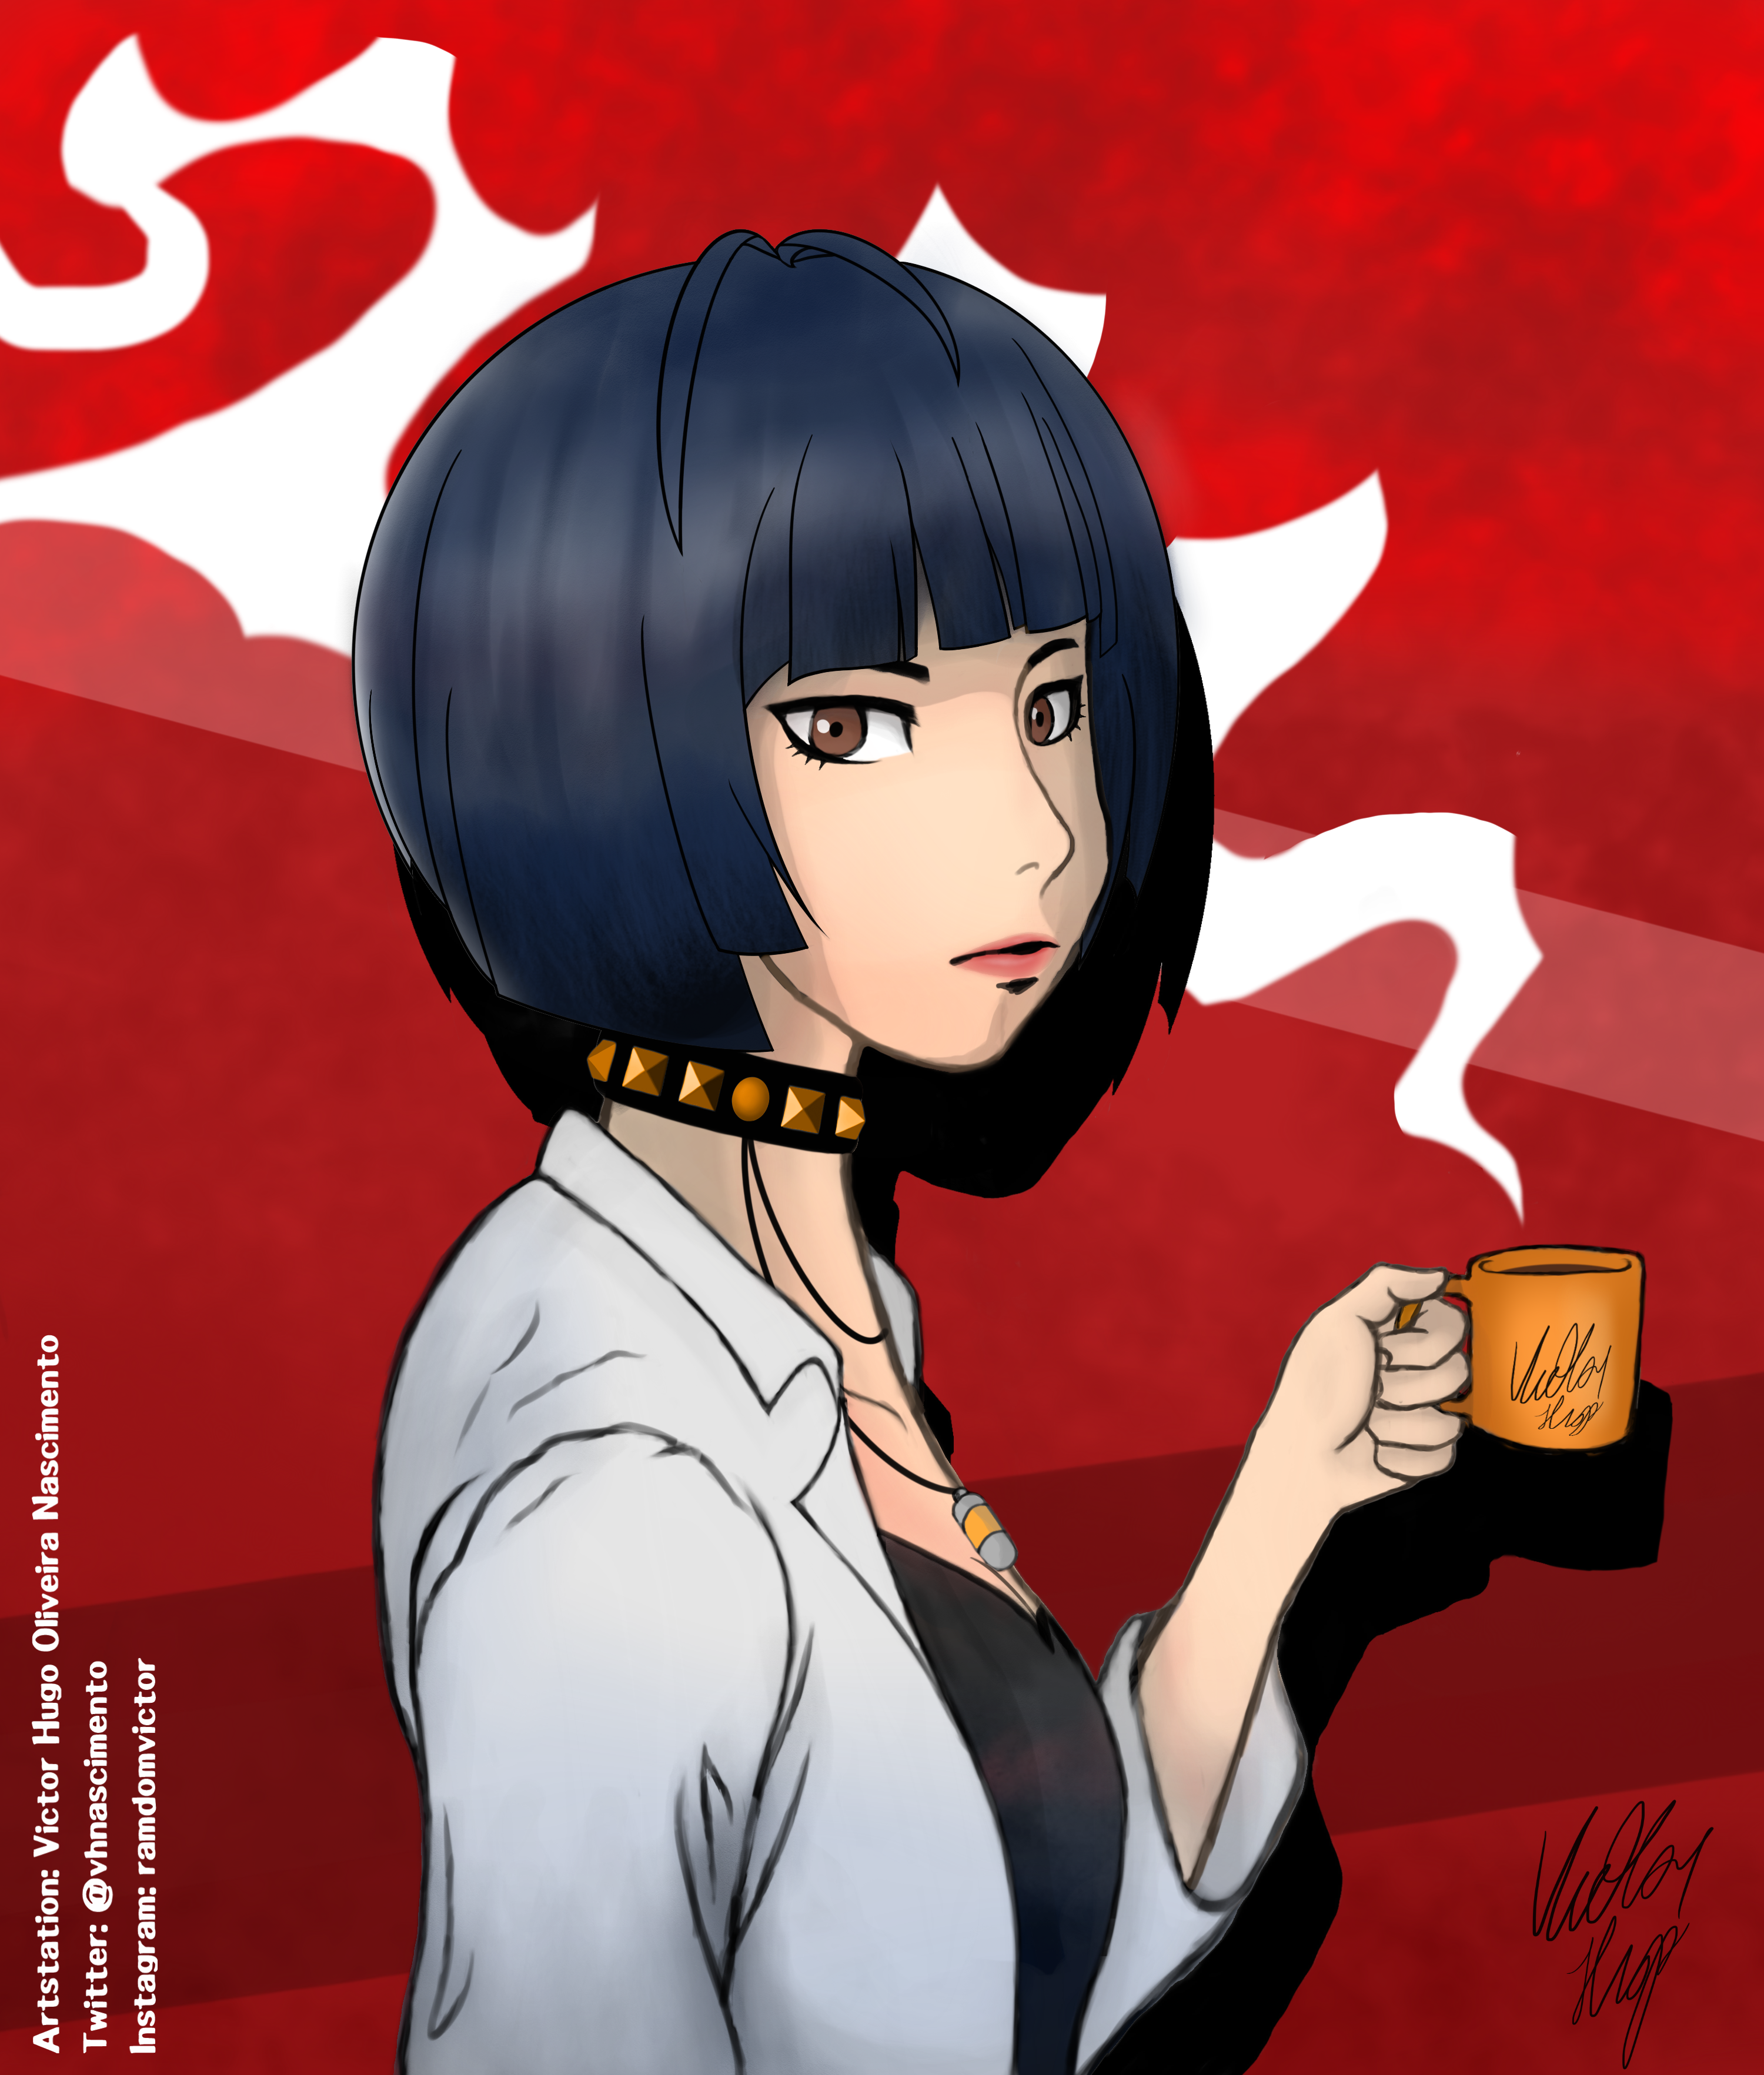 A drawing of Tae Takemi from Persona 5. She was my first max confidant in Persona 5. I felt very proud of the drawing I did